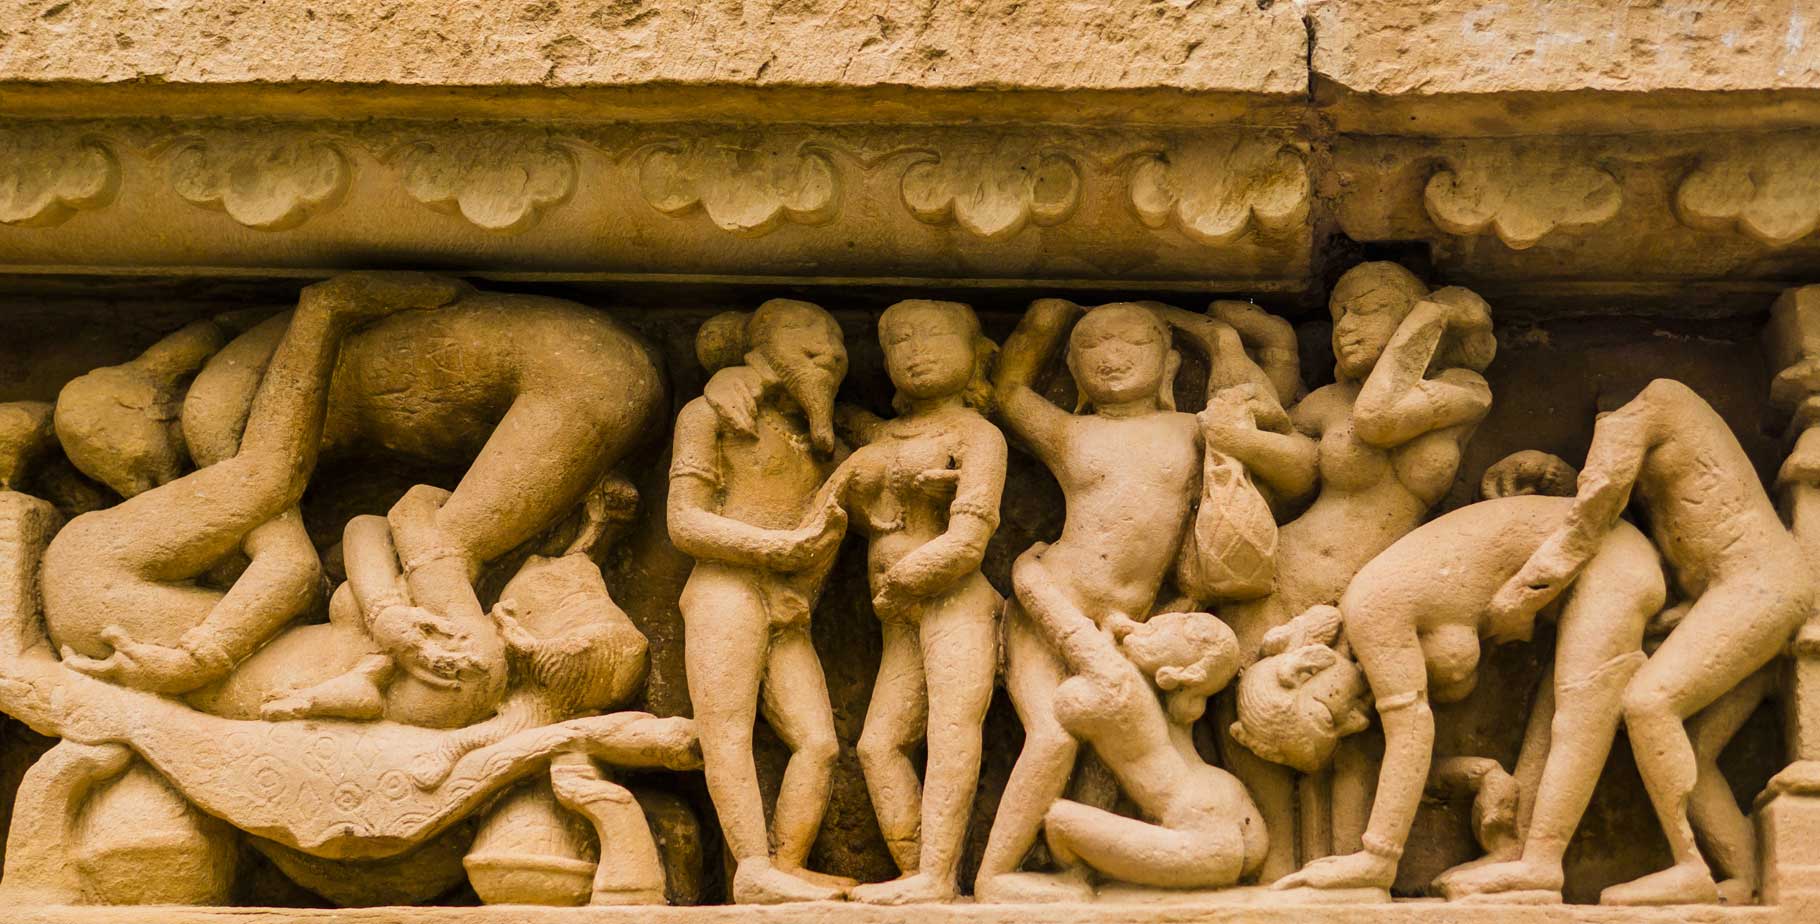 The Real Kama Sutra: More Than an Ancient Sex Manual